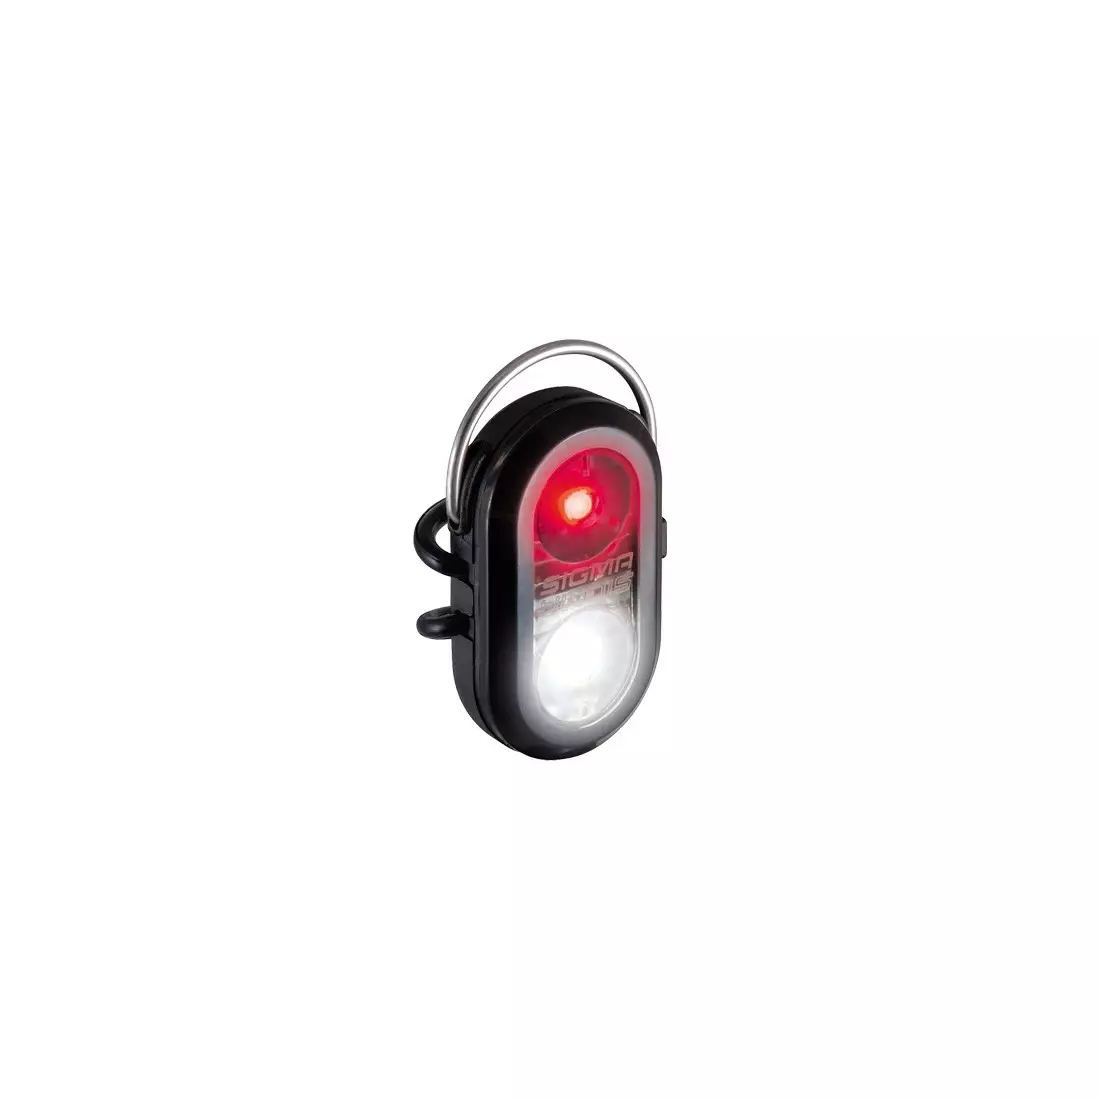 SIGMA MICRO DUO BLACK front/rear bicycle light SIG-17250